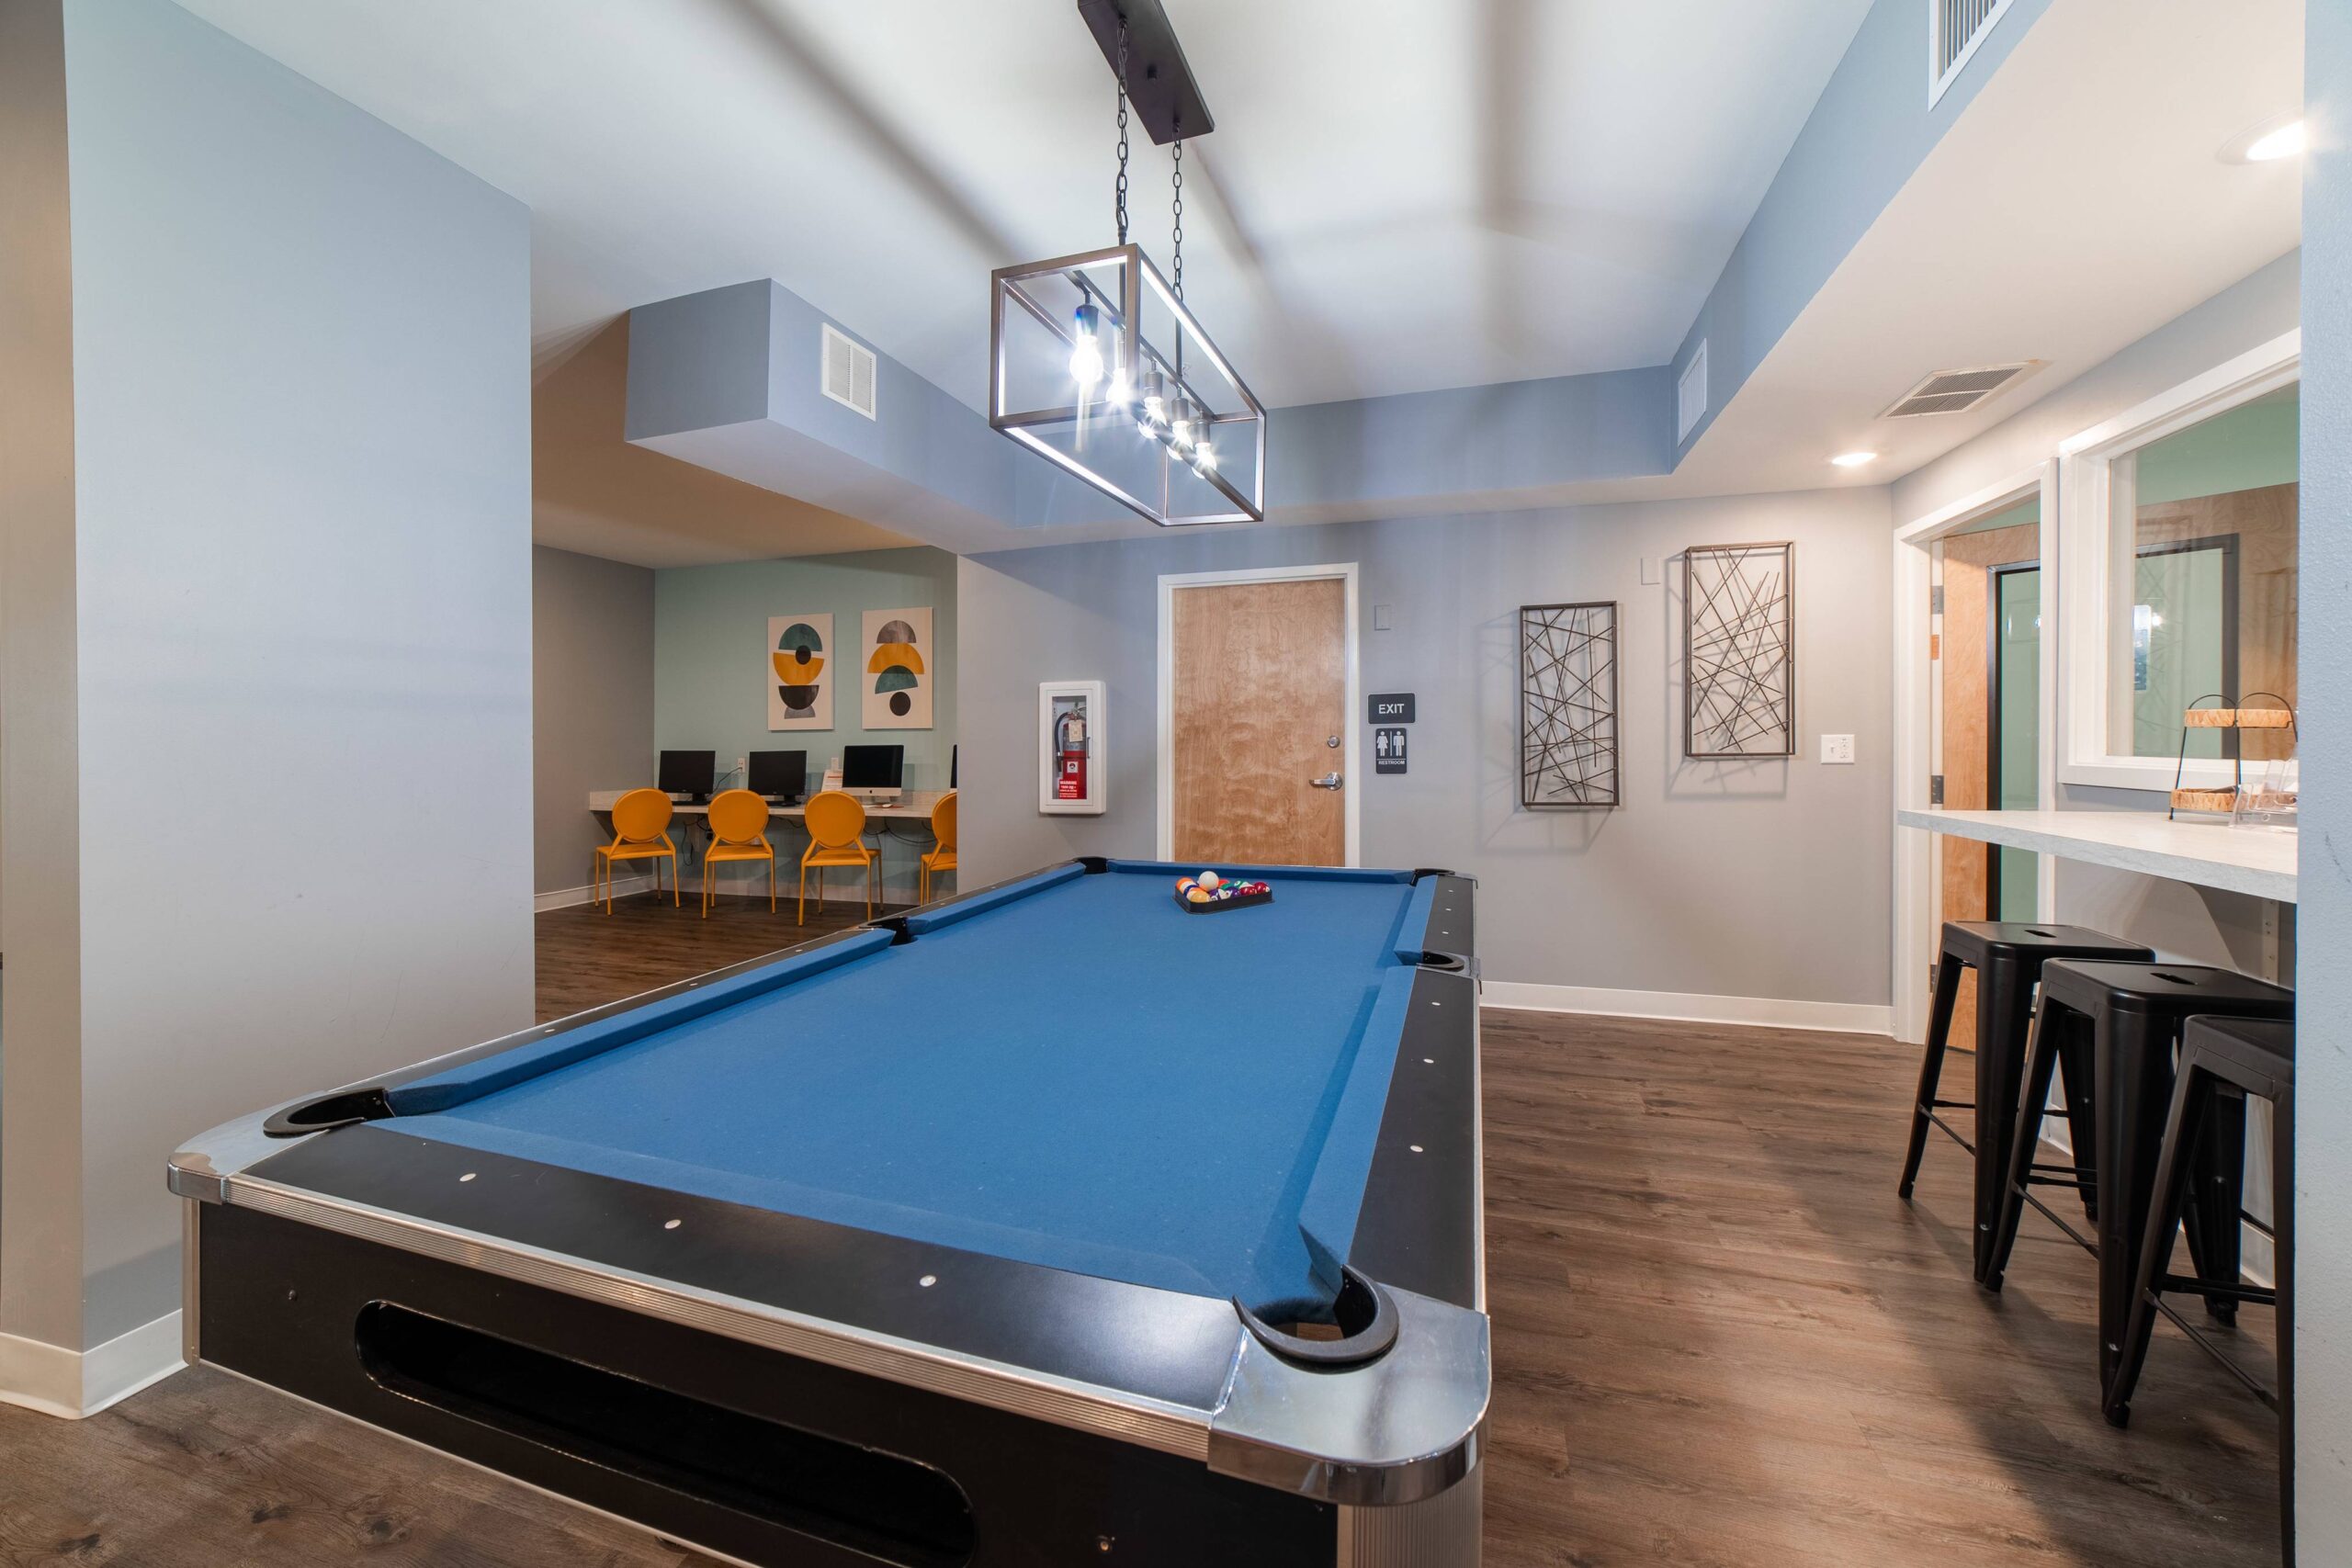 Student game room with pool table